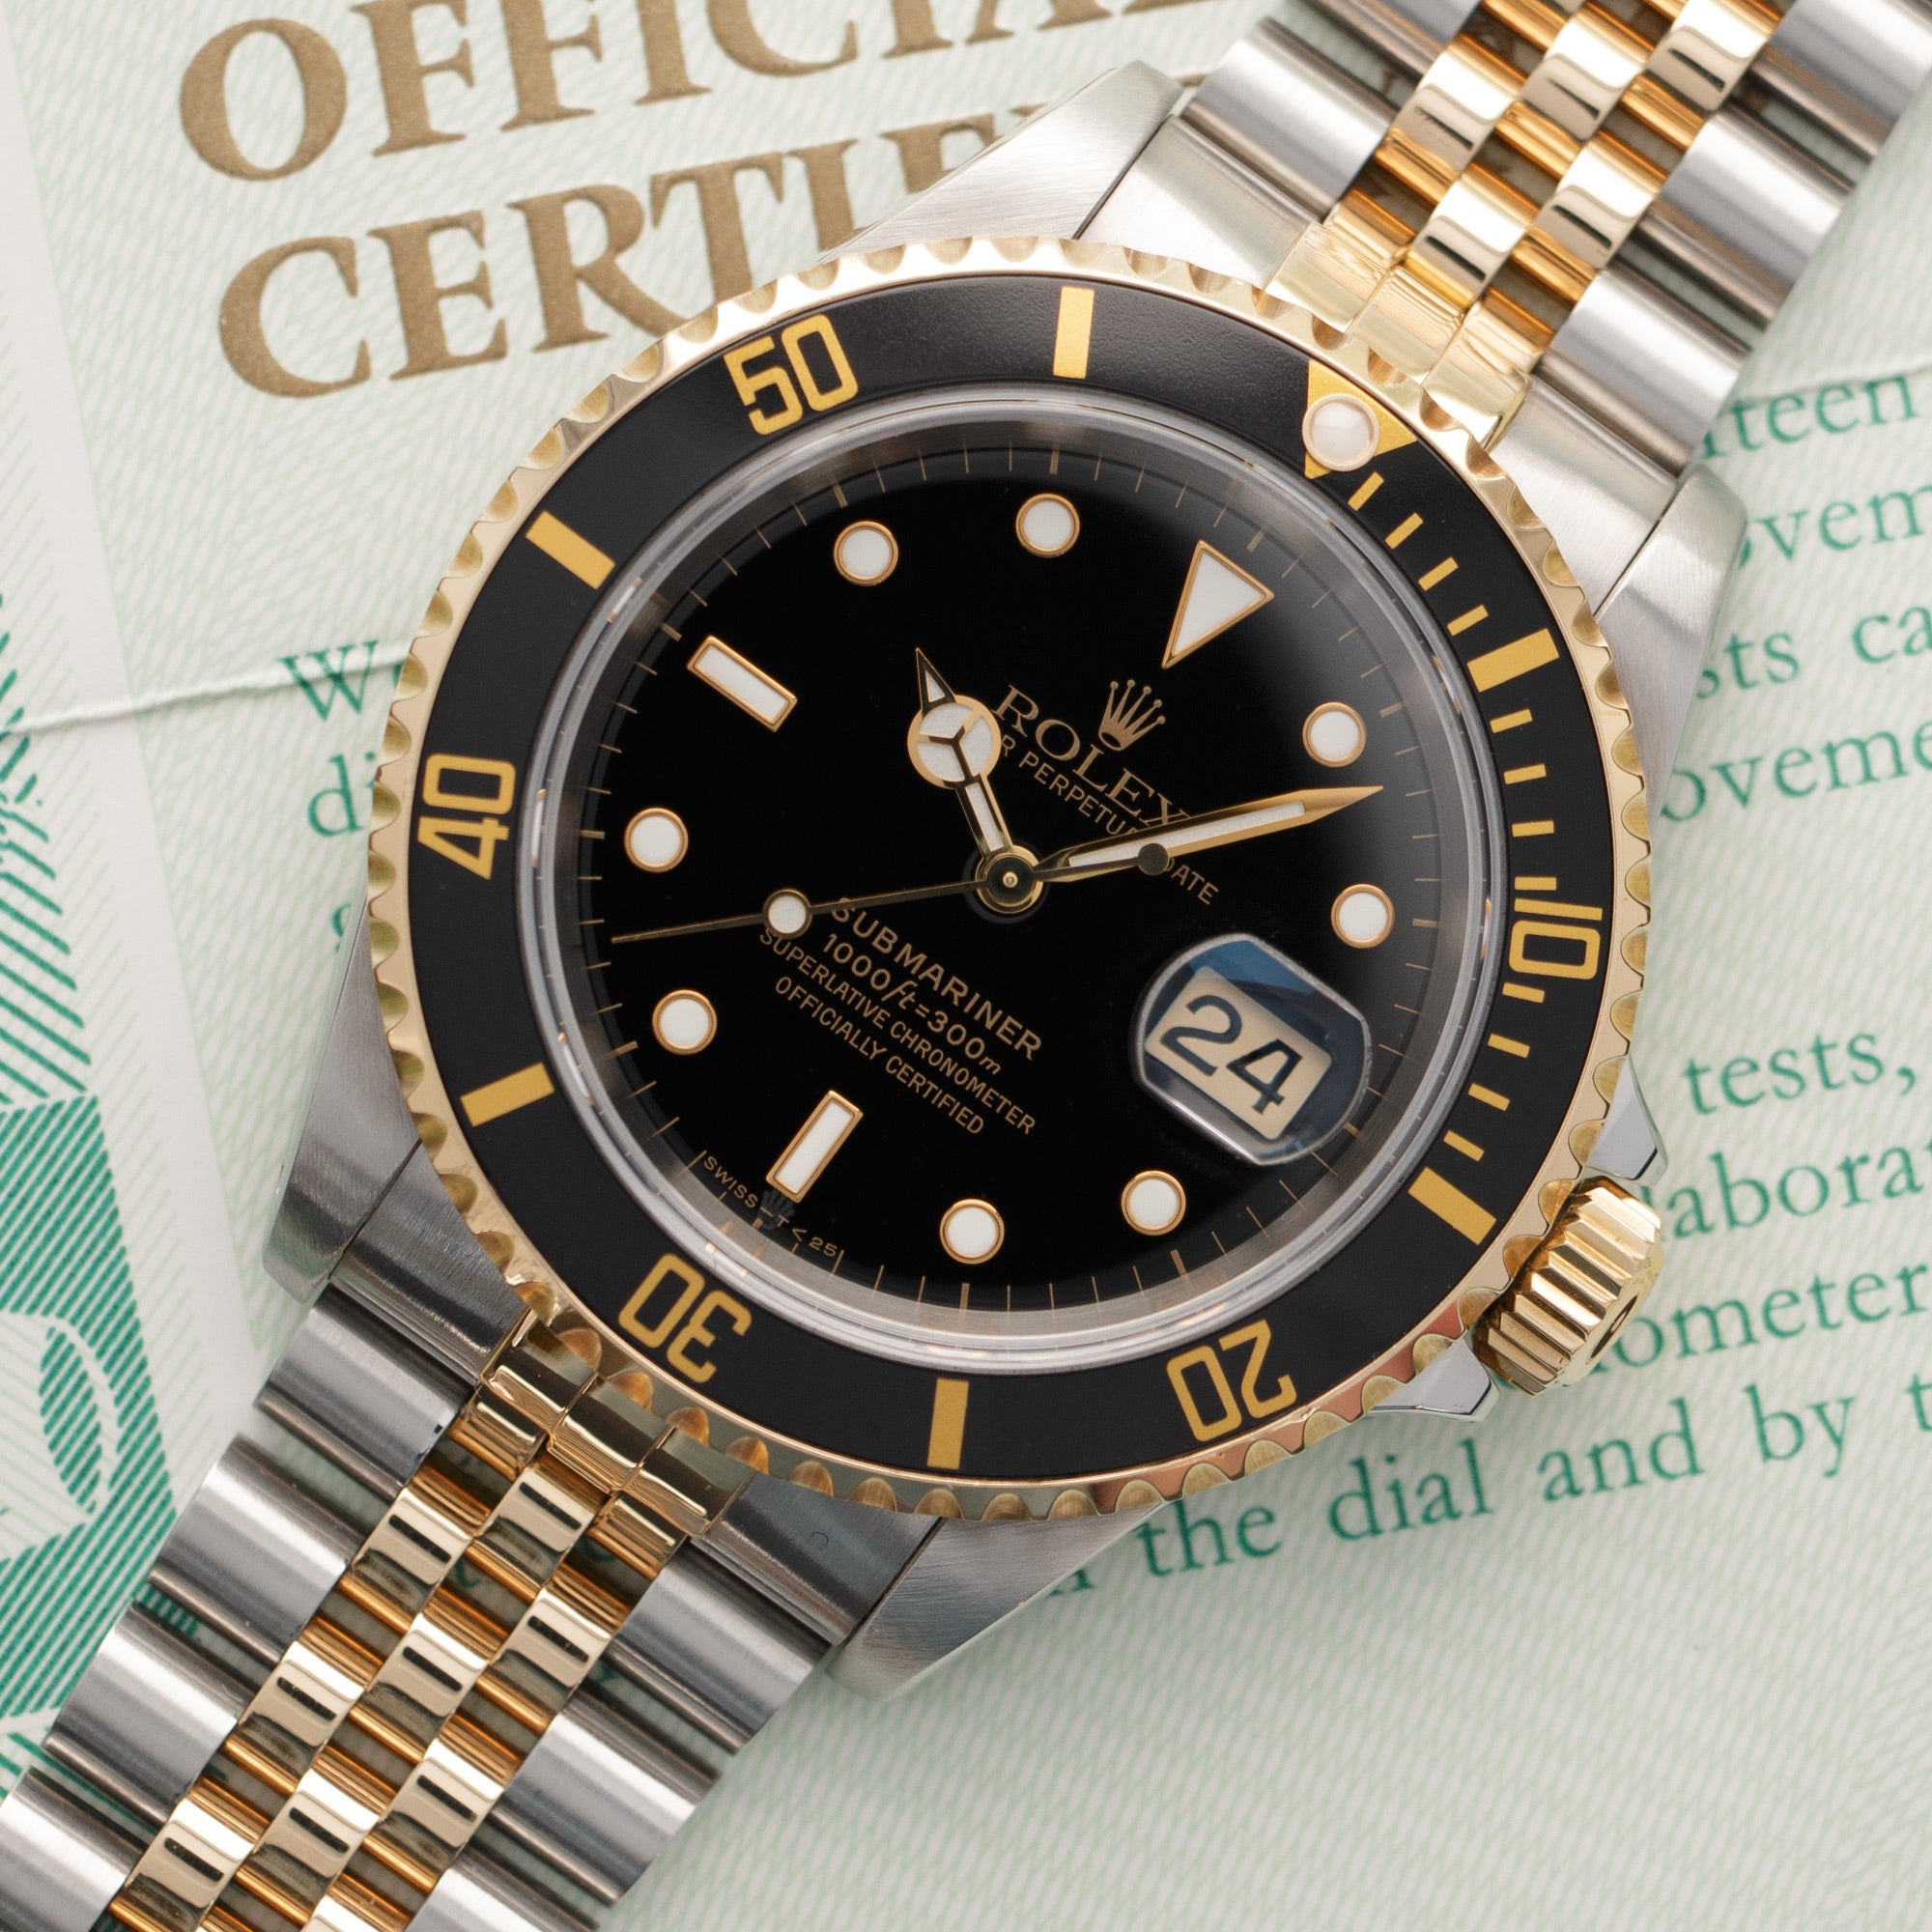 Rolex - Rolex Two-Tone Submariner, Ref. 16613 with Original Paper - The Keystone Watches